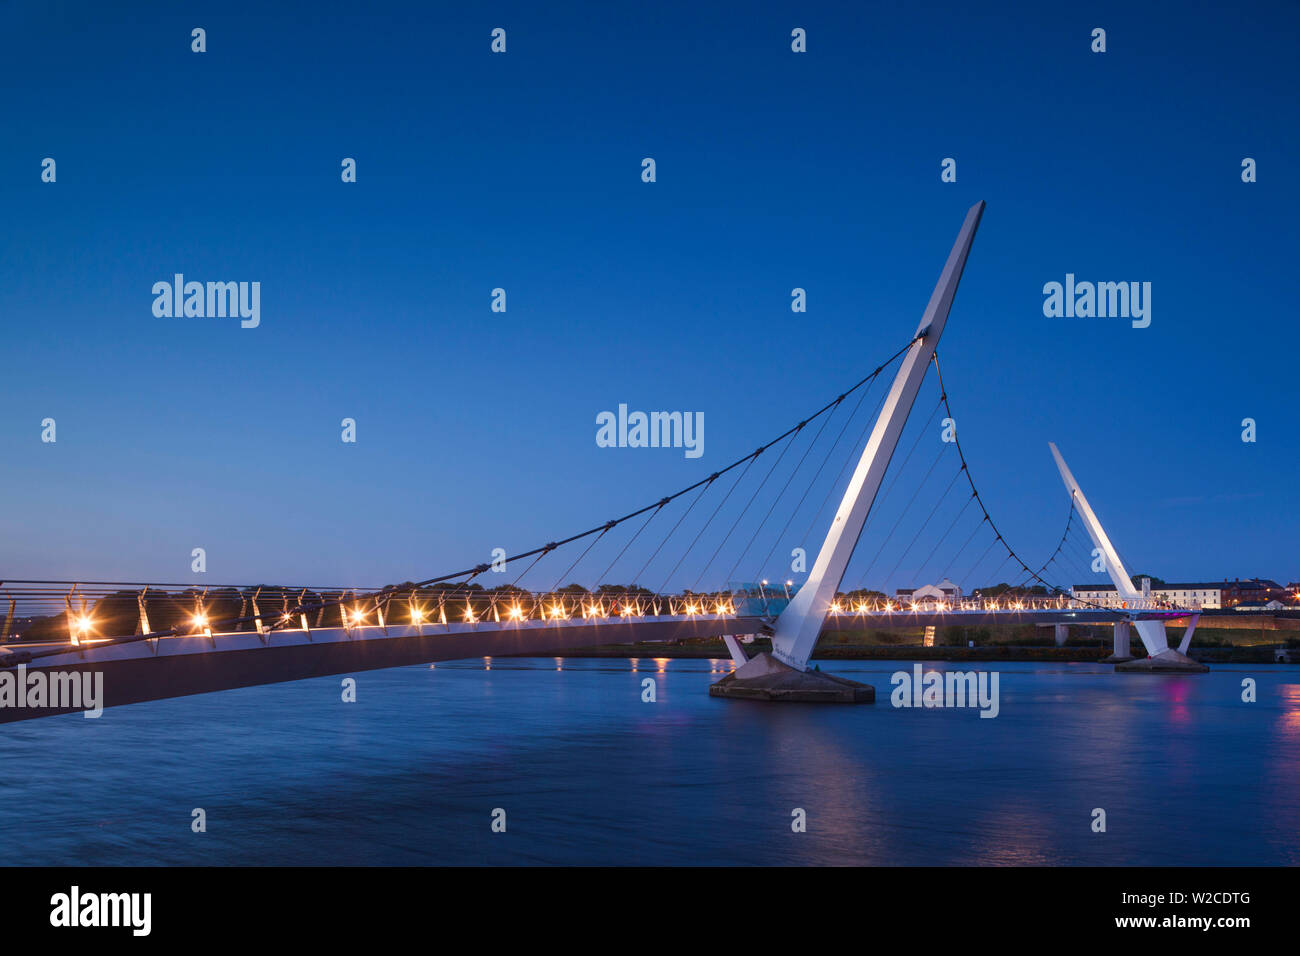 UK, Northern Ireland, County Londonderry, Derry, The Peace Bridge over the River Foyle, 2011, dusk Stock Photo